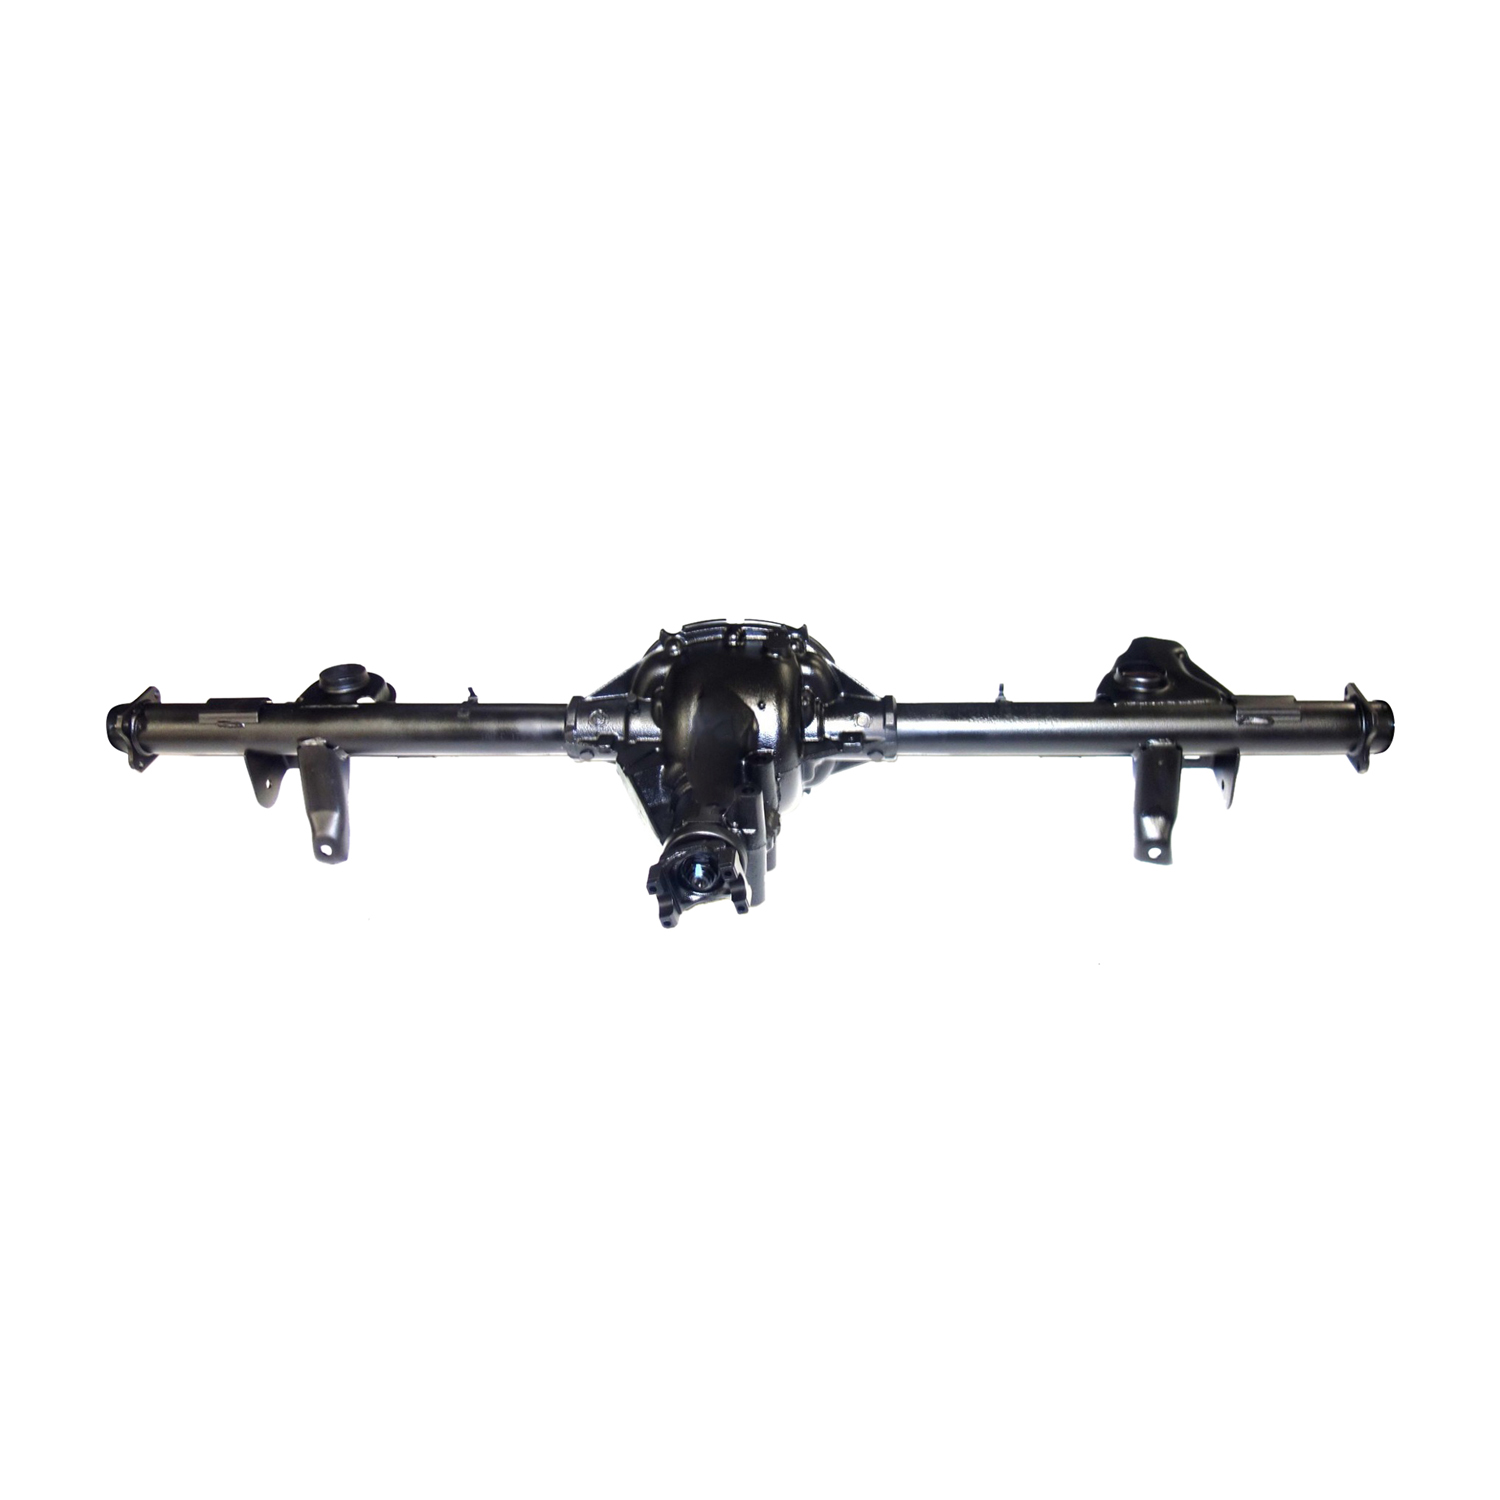 Reman Axle Assy GM 7.5" 98-03 Chevy S10 & S15 3.73 Ratio, 2wd, Chassis Pkg, Posi